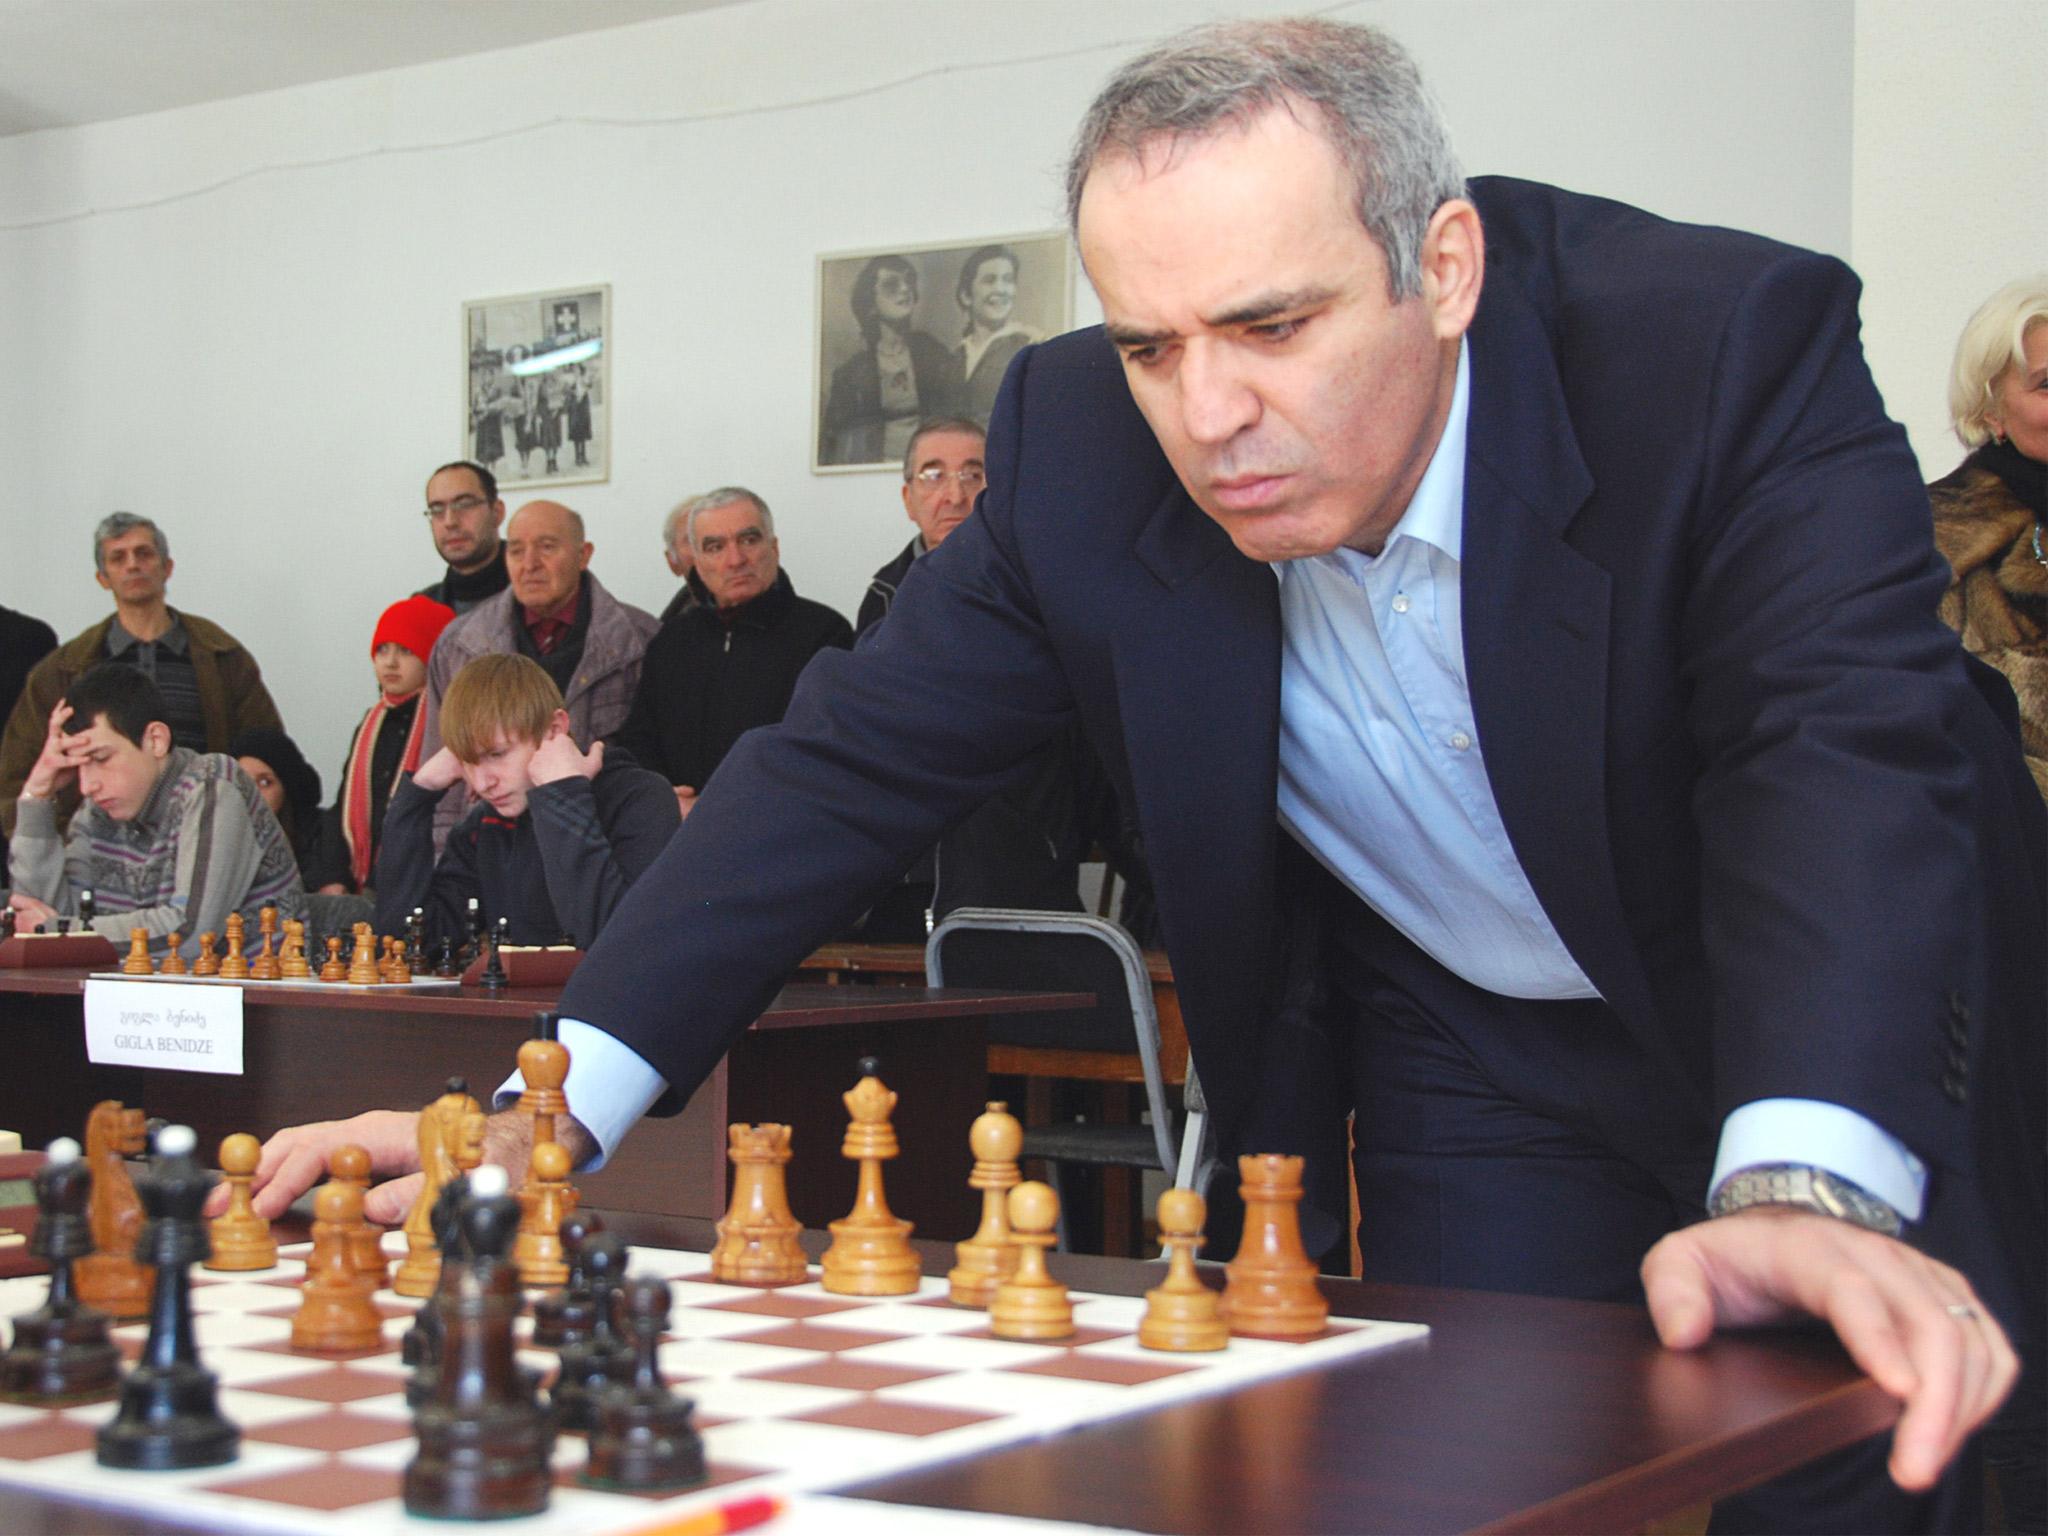 Russia boasts some 239 grandmasters - by far the most of any country